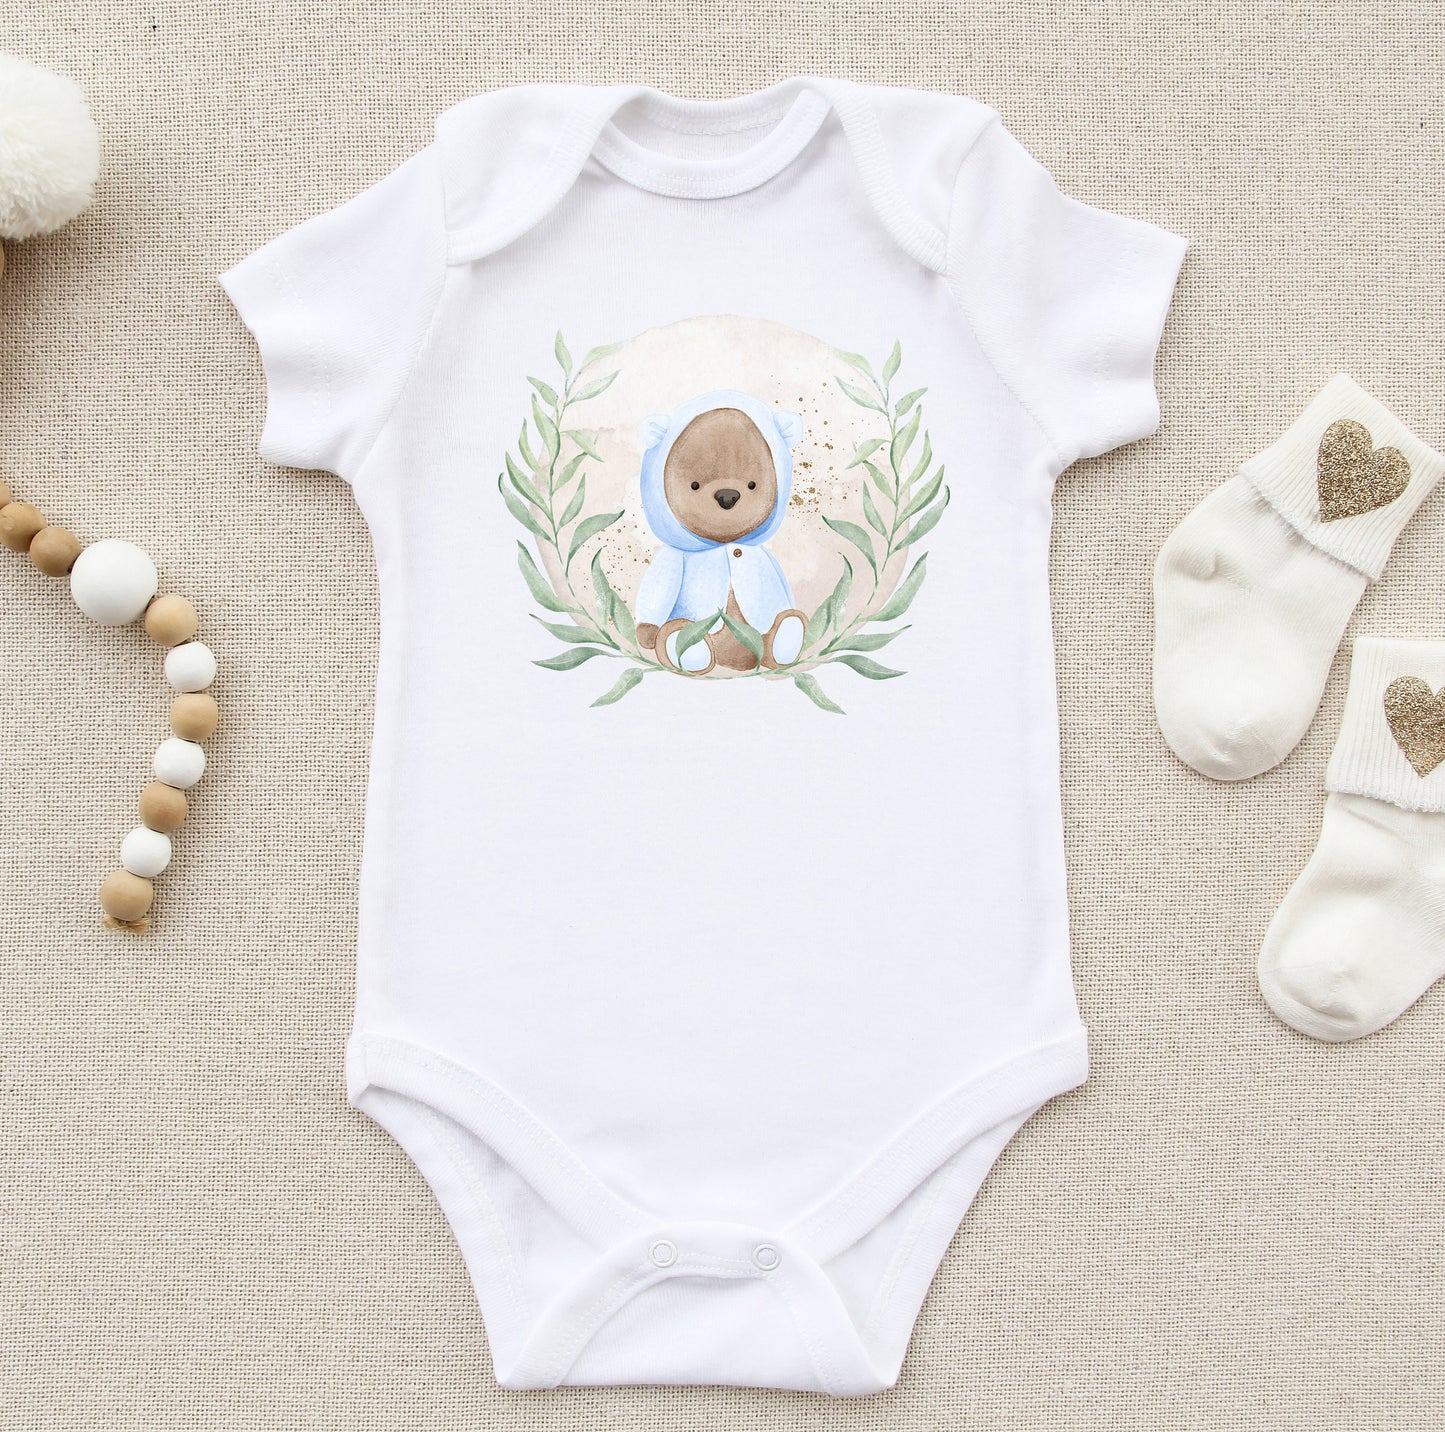 Baby Bear Sublimation Design PNG, Greenery Toddler Sublimation Design Download, Teddy Bear Design for kids, Baby Announcement Sublimation